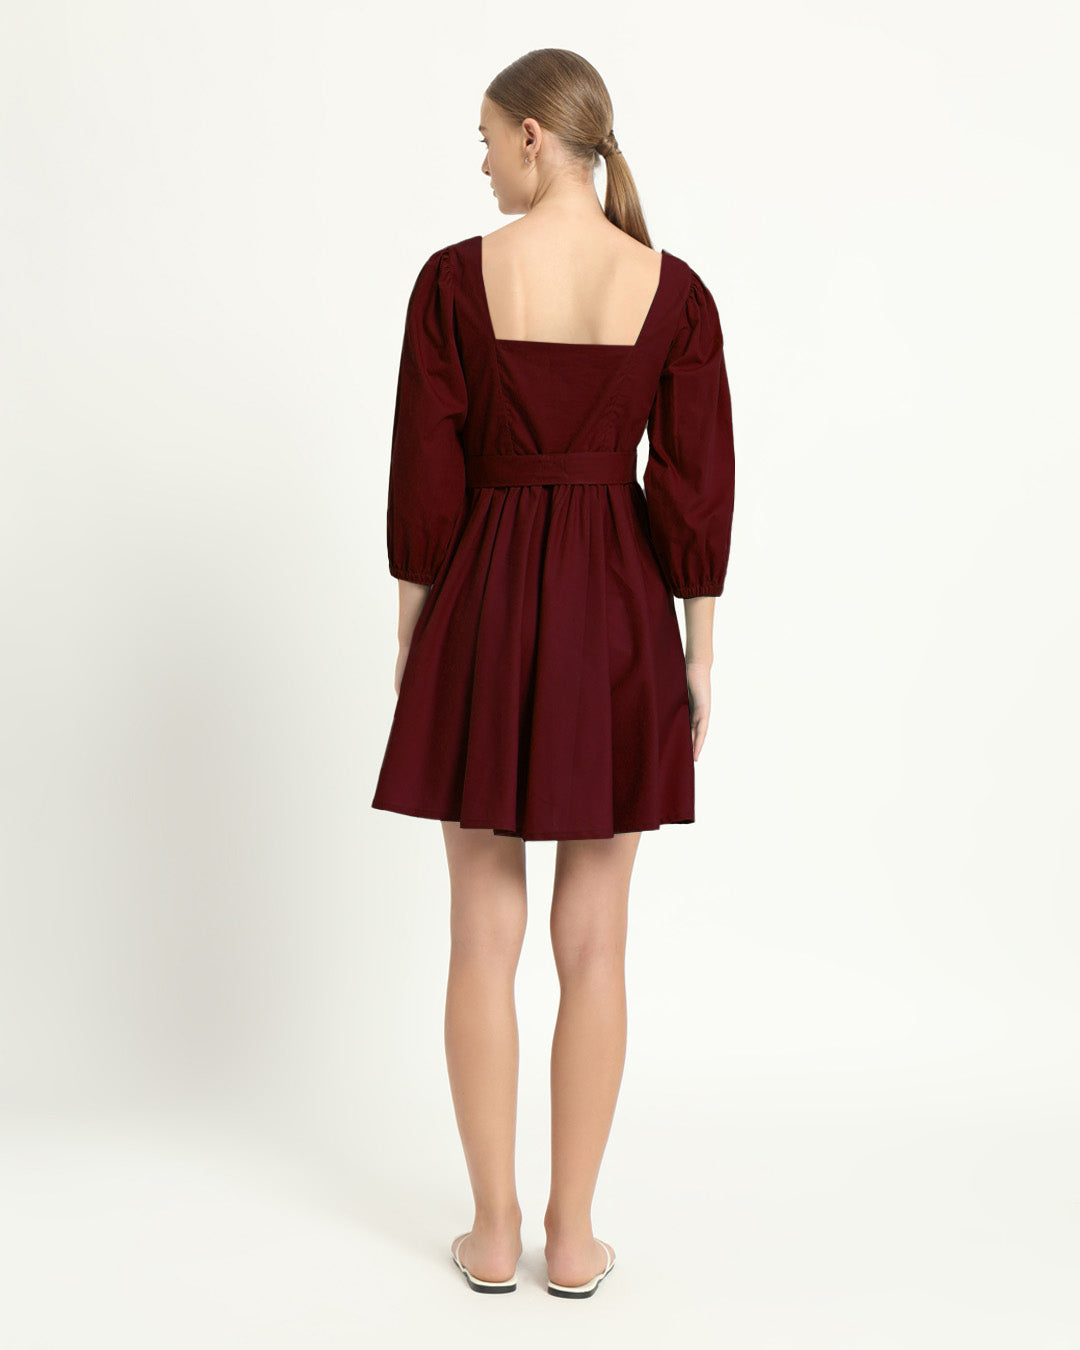 The Winklern Rouge Cotton Dress